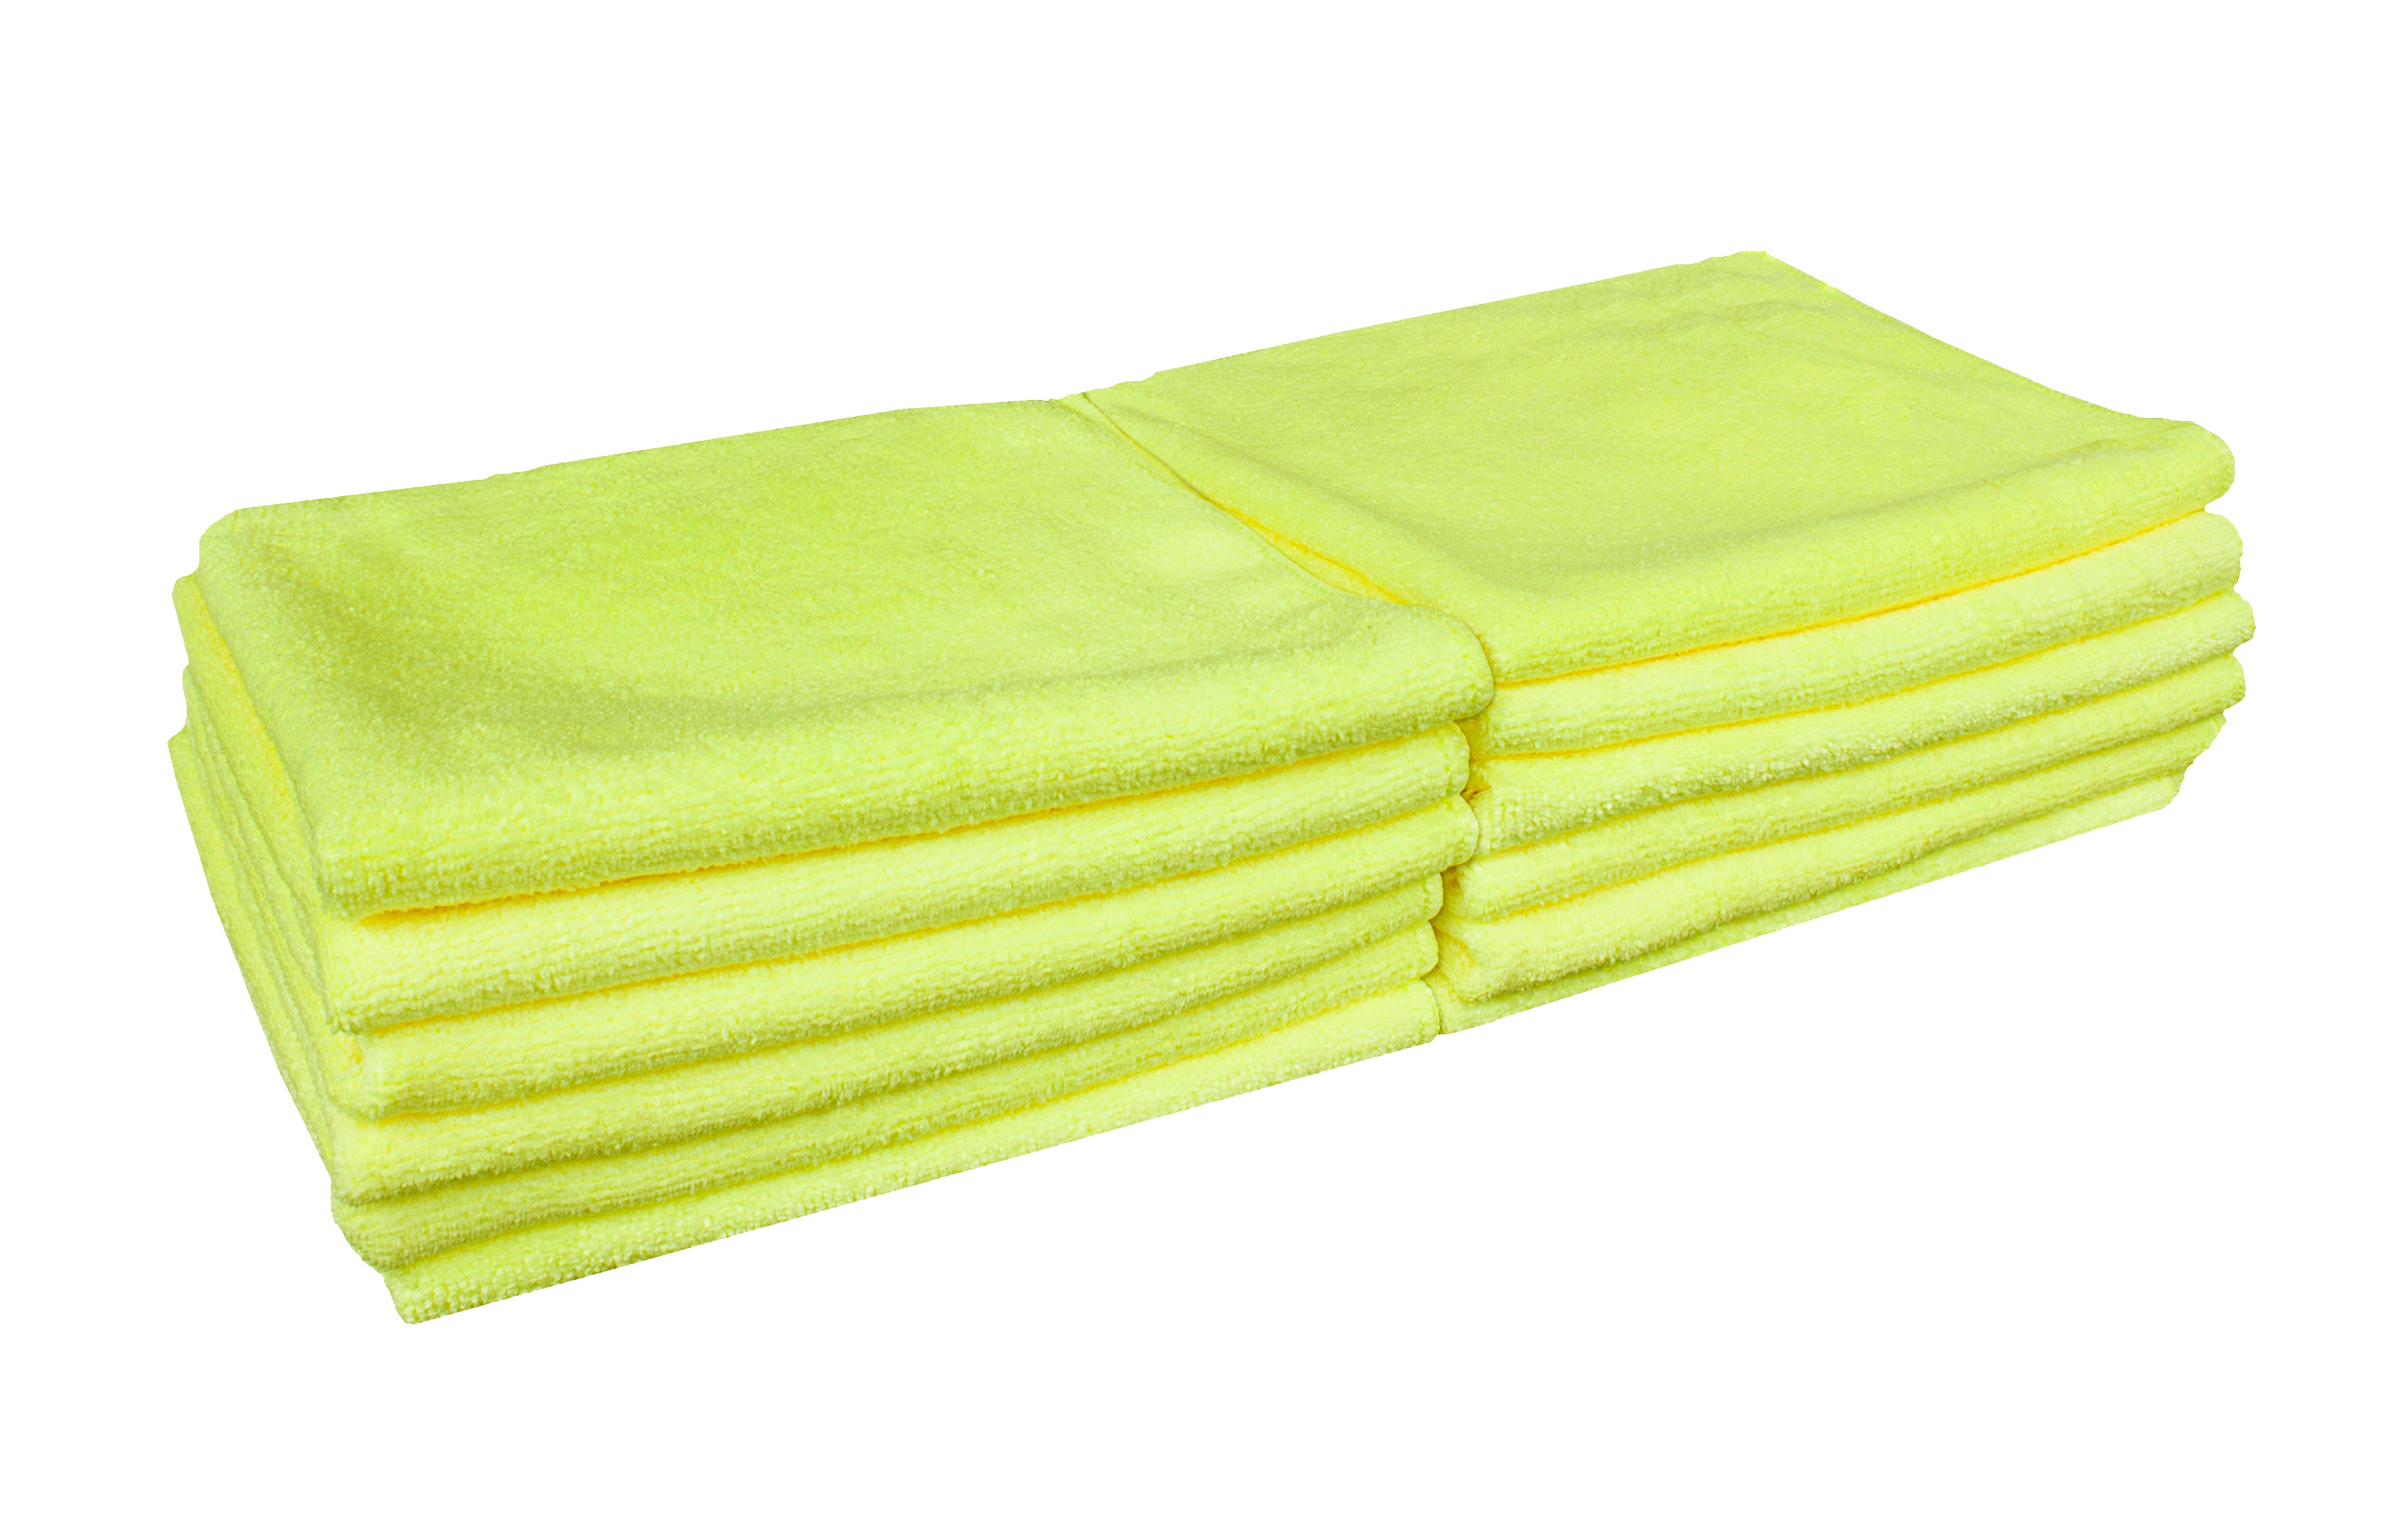 Detailer's Preference® 12 x 12 in. 300 GSM Ultrasonic Cut Yellow Microfiber  Cleaning Cloths – 50-pack